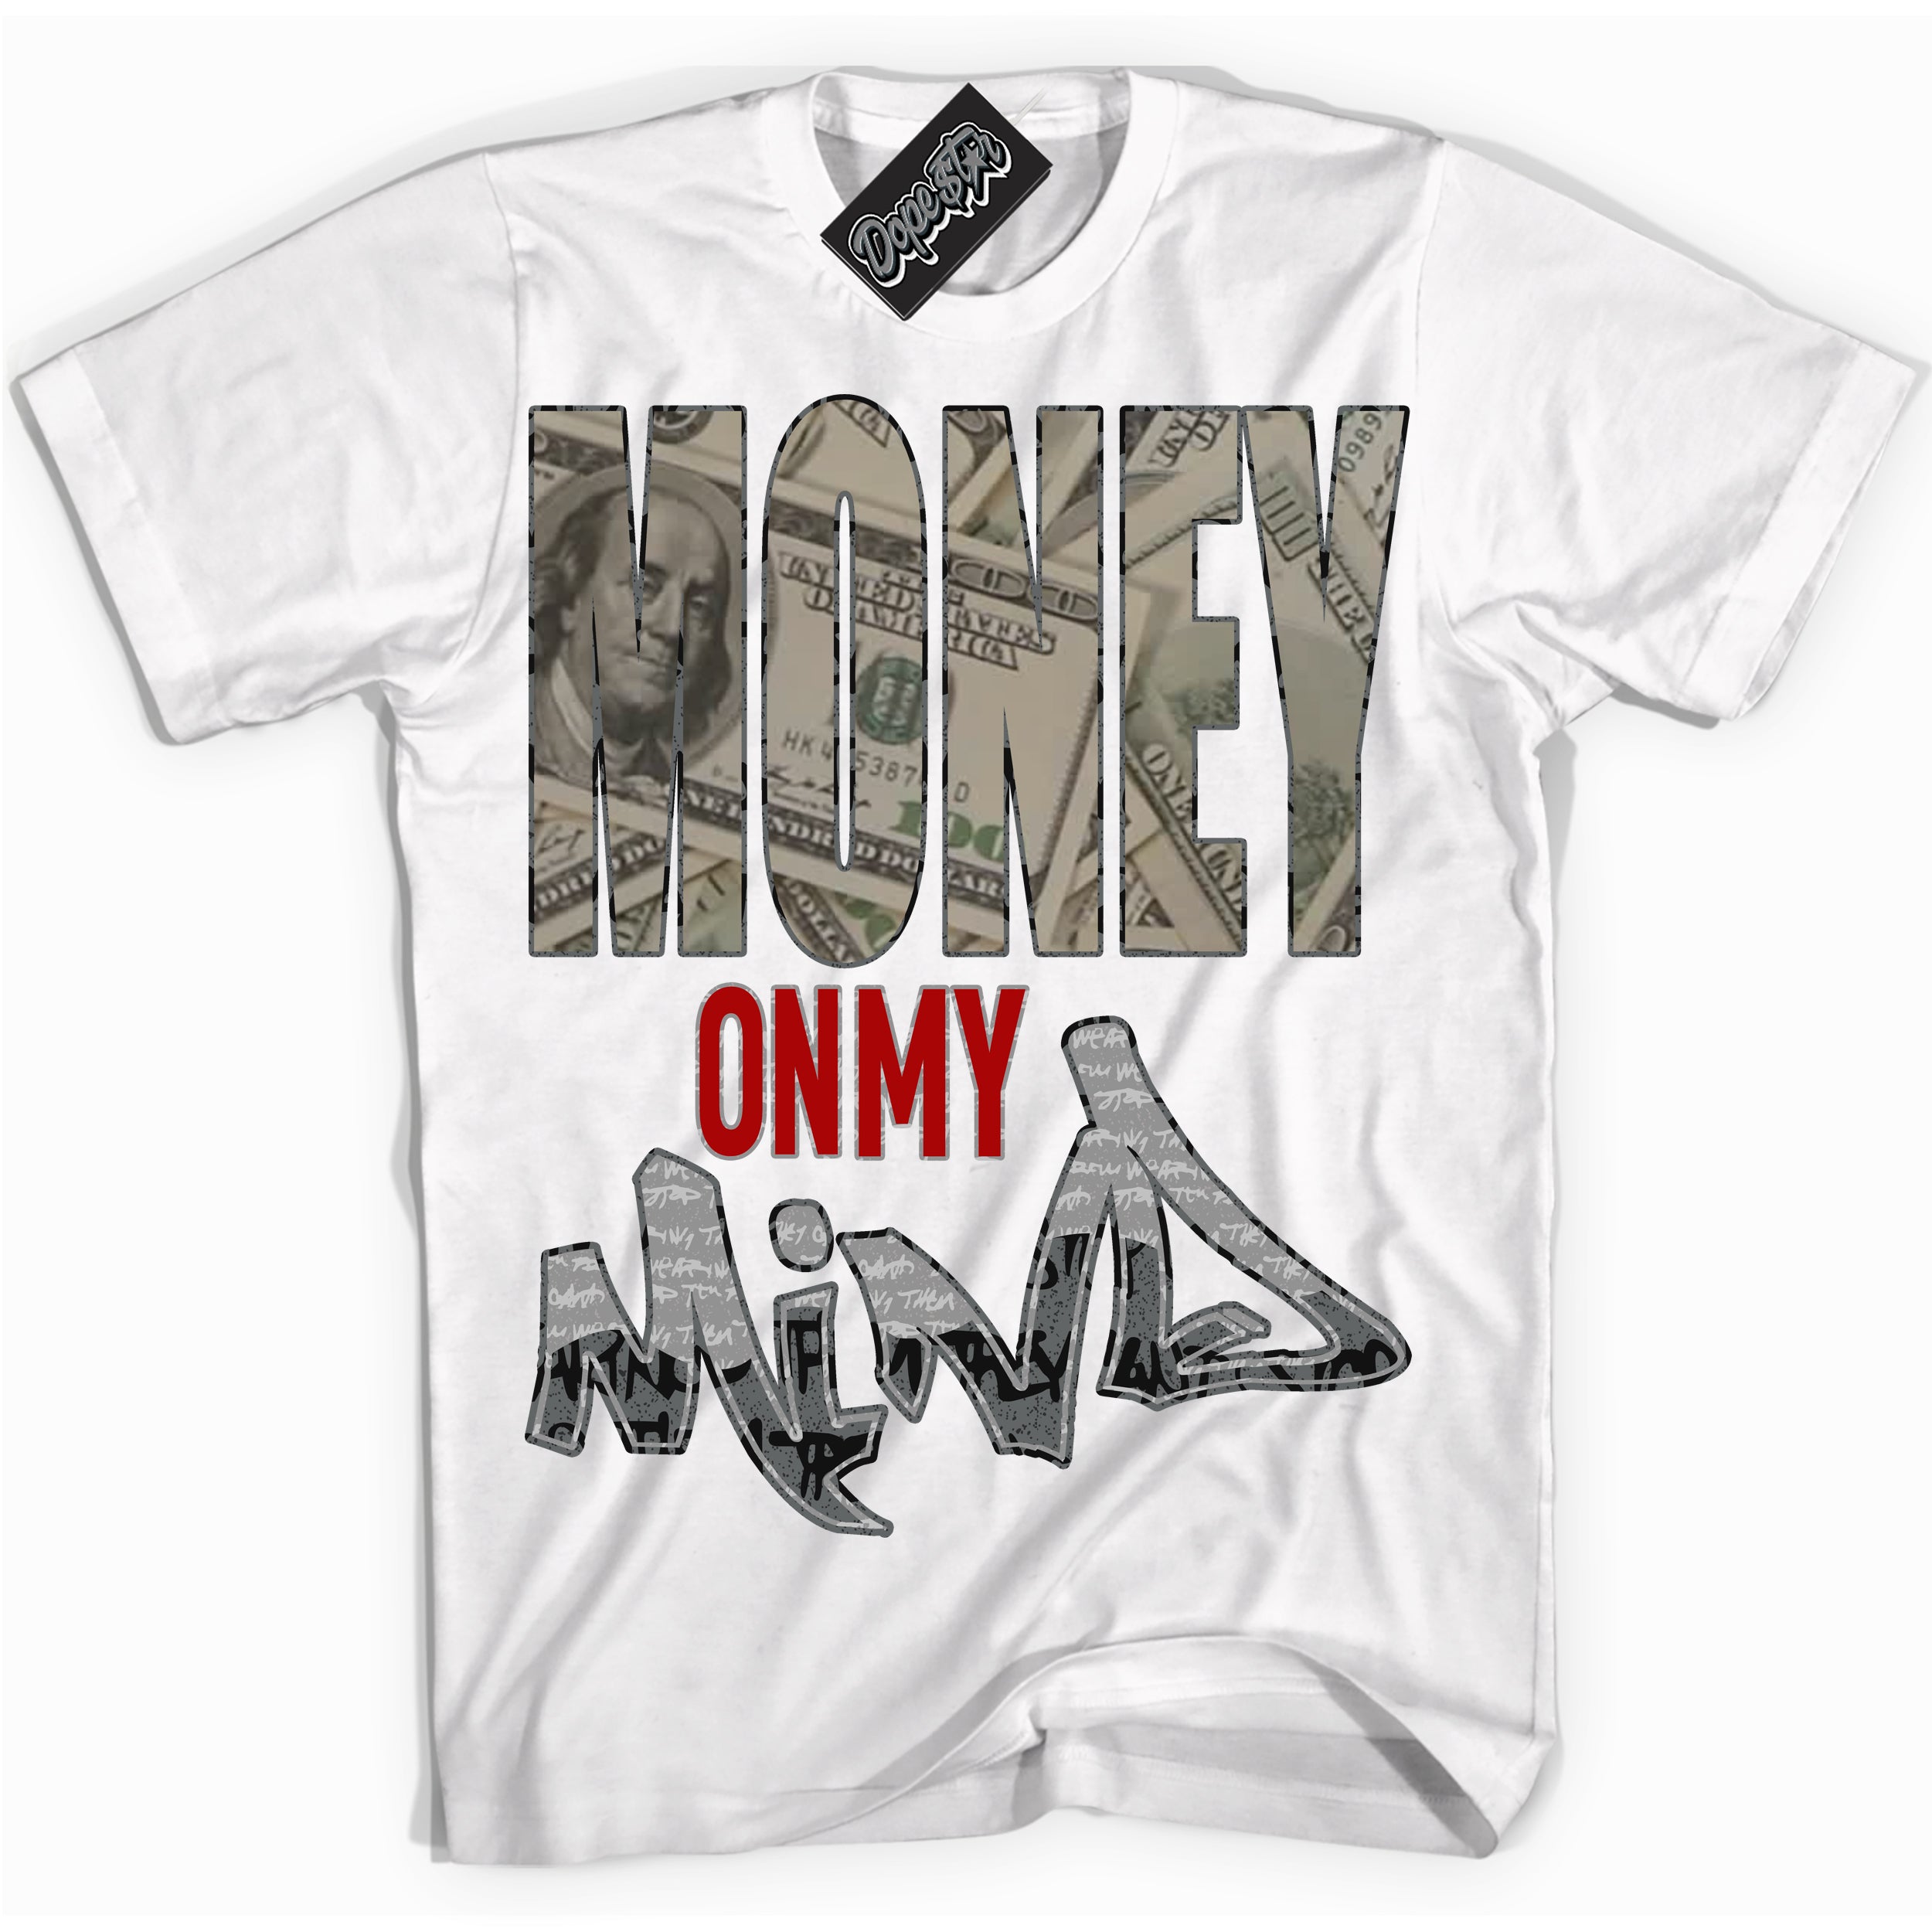 Cool White Shirt with “ Money On My Mind ” design that perfectly matches Rebellionaire 1s Sneakers.